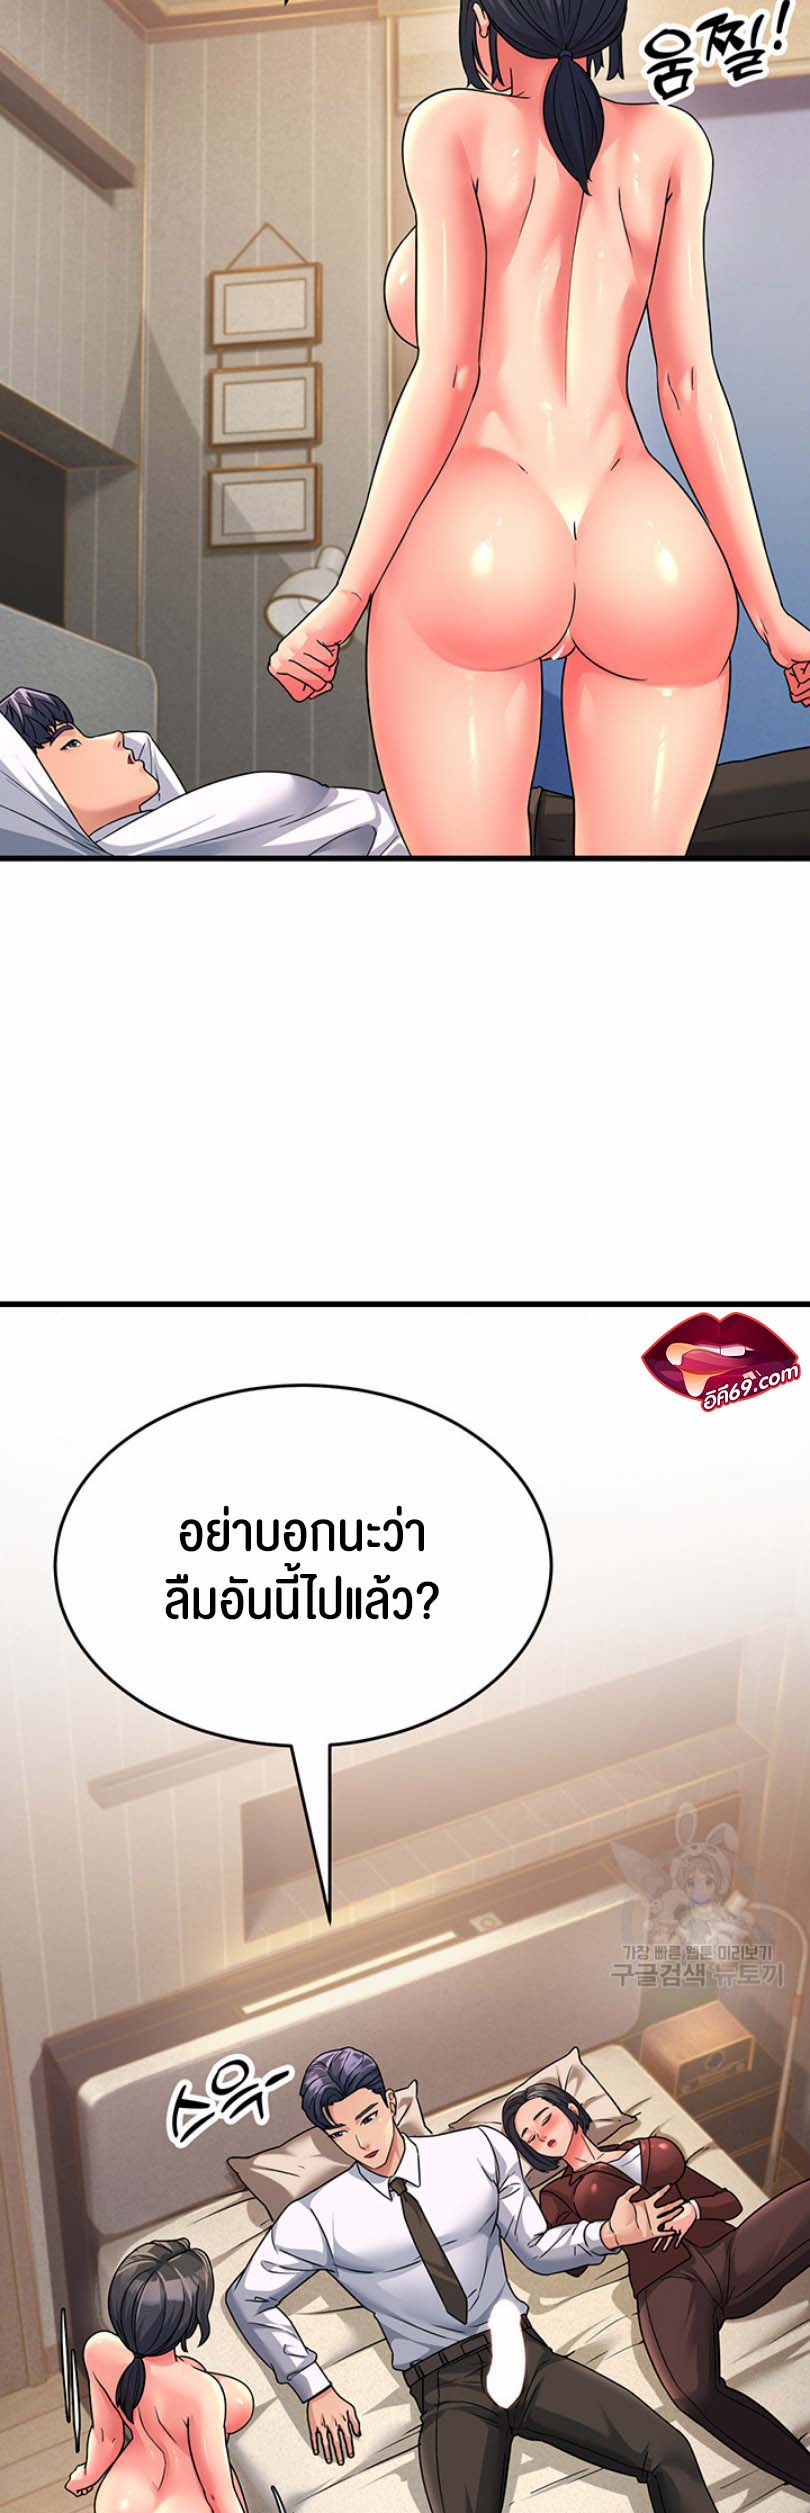 à¸­à¹ˆà¸²à¸™à¹‚à¸”à¸ˆà¸´à¸™ à¹€à¸£à¸·à¹ˆà¸­à¸‡ Mother in Law Bends To My Will 10 22